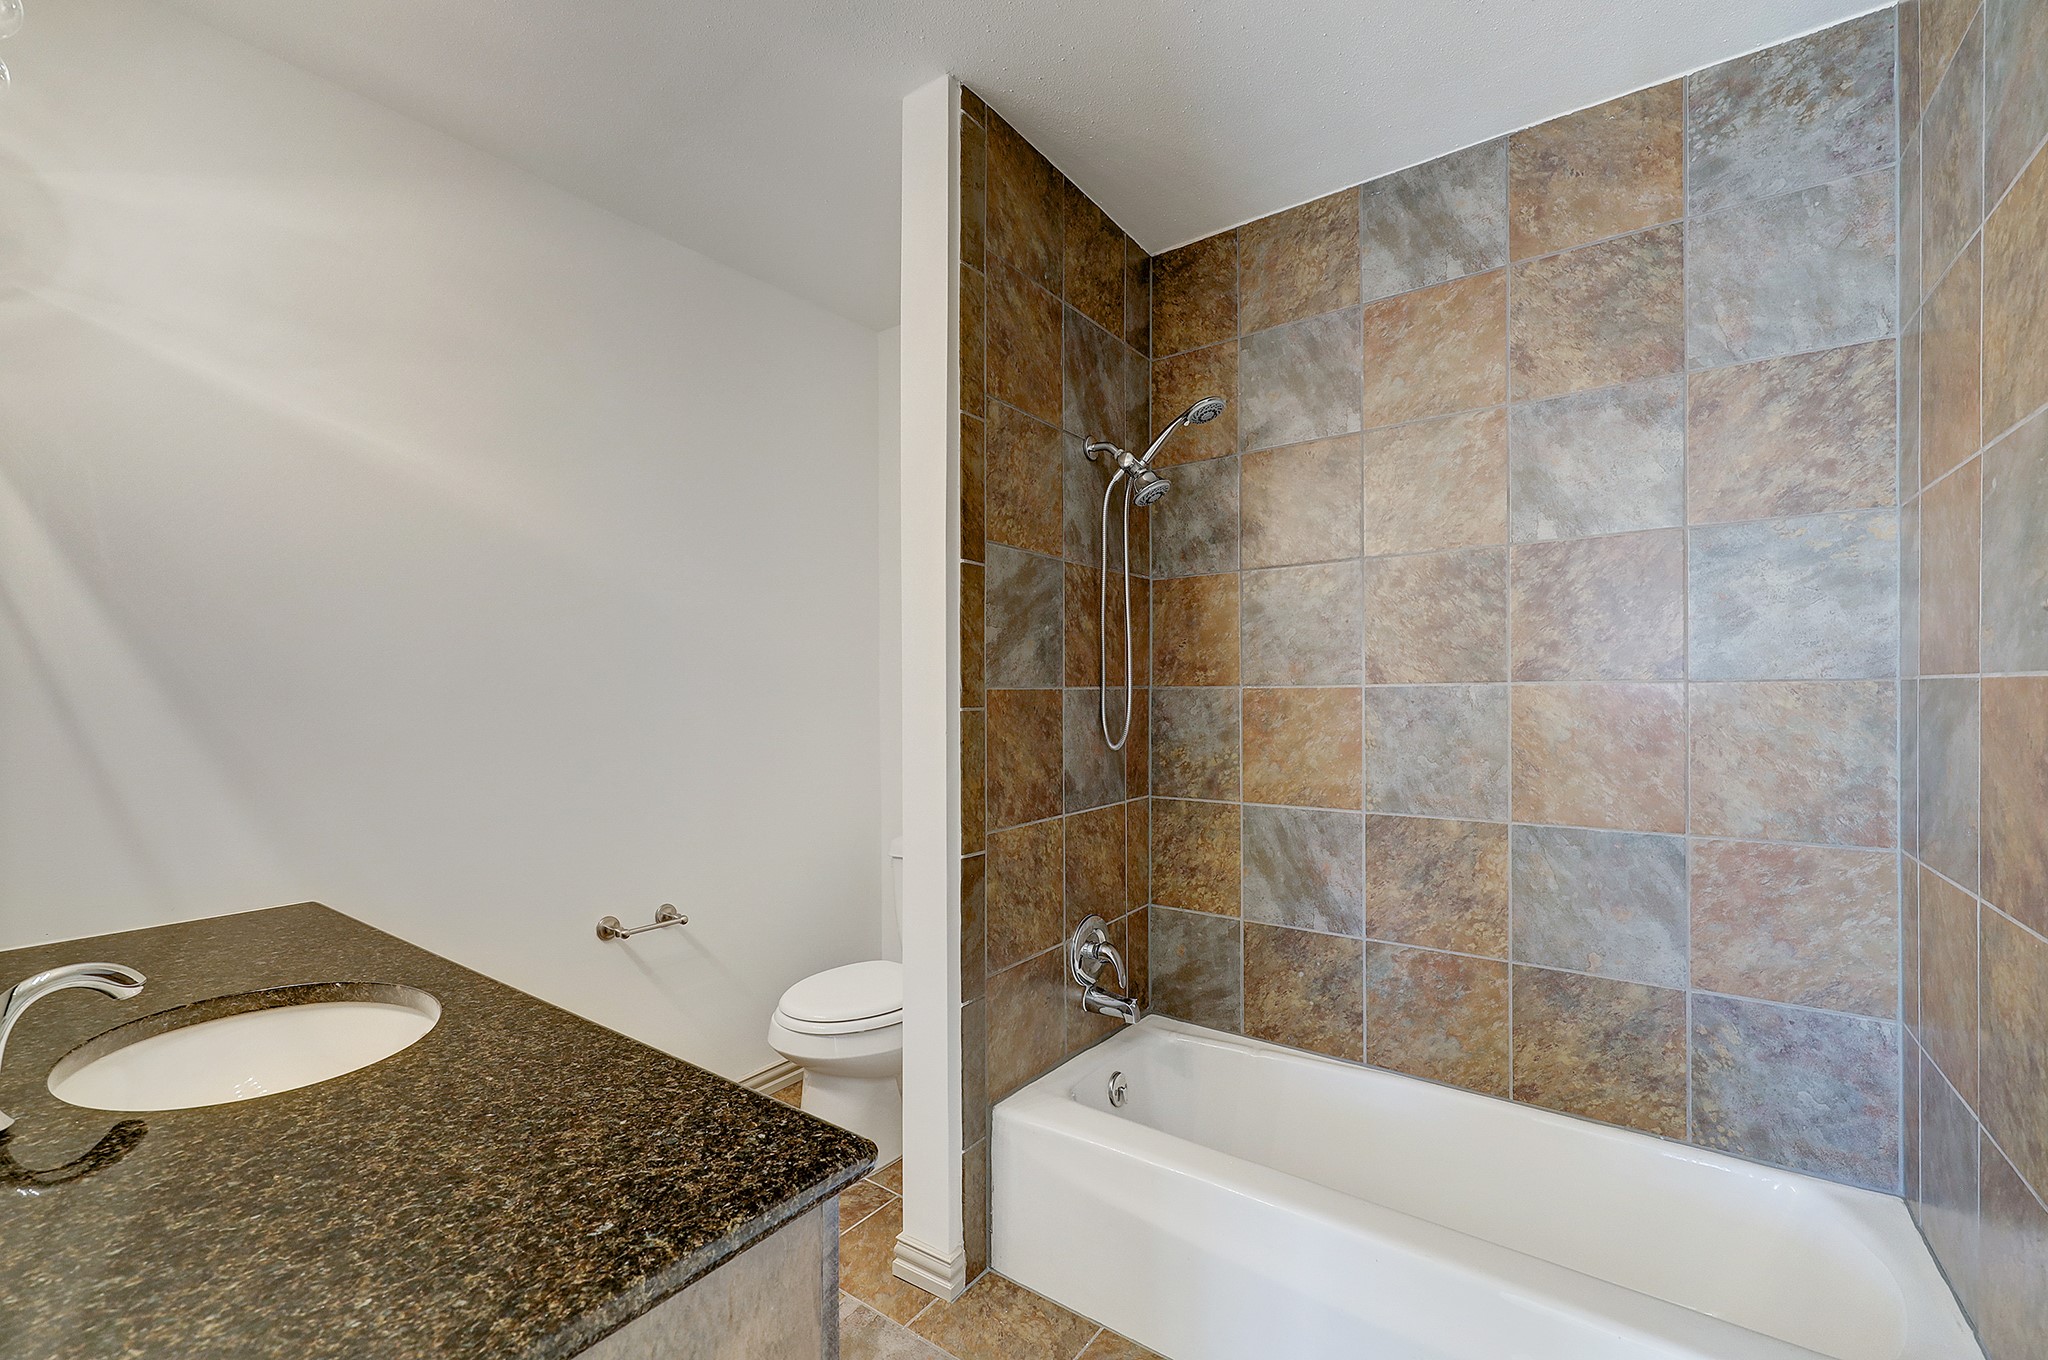 Nodding to its traditional charm, stoned tile extends throughout the tub/shower area. Granite countertops, with an under-mount sink and chrome plumbing fixtures, complete the space.